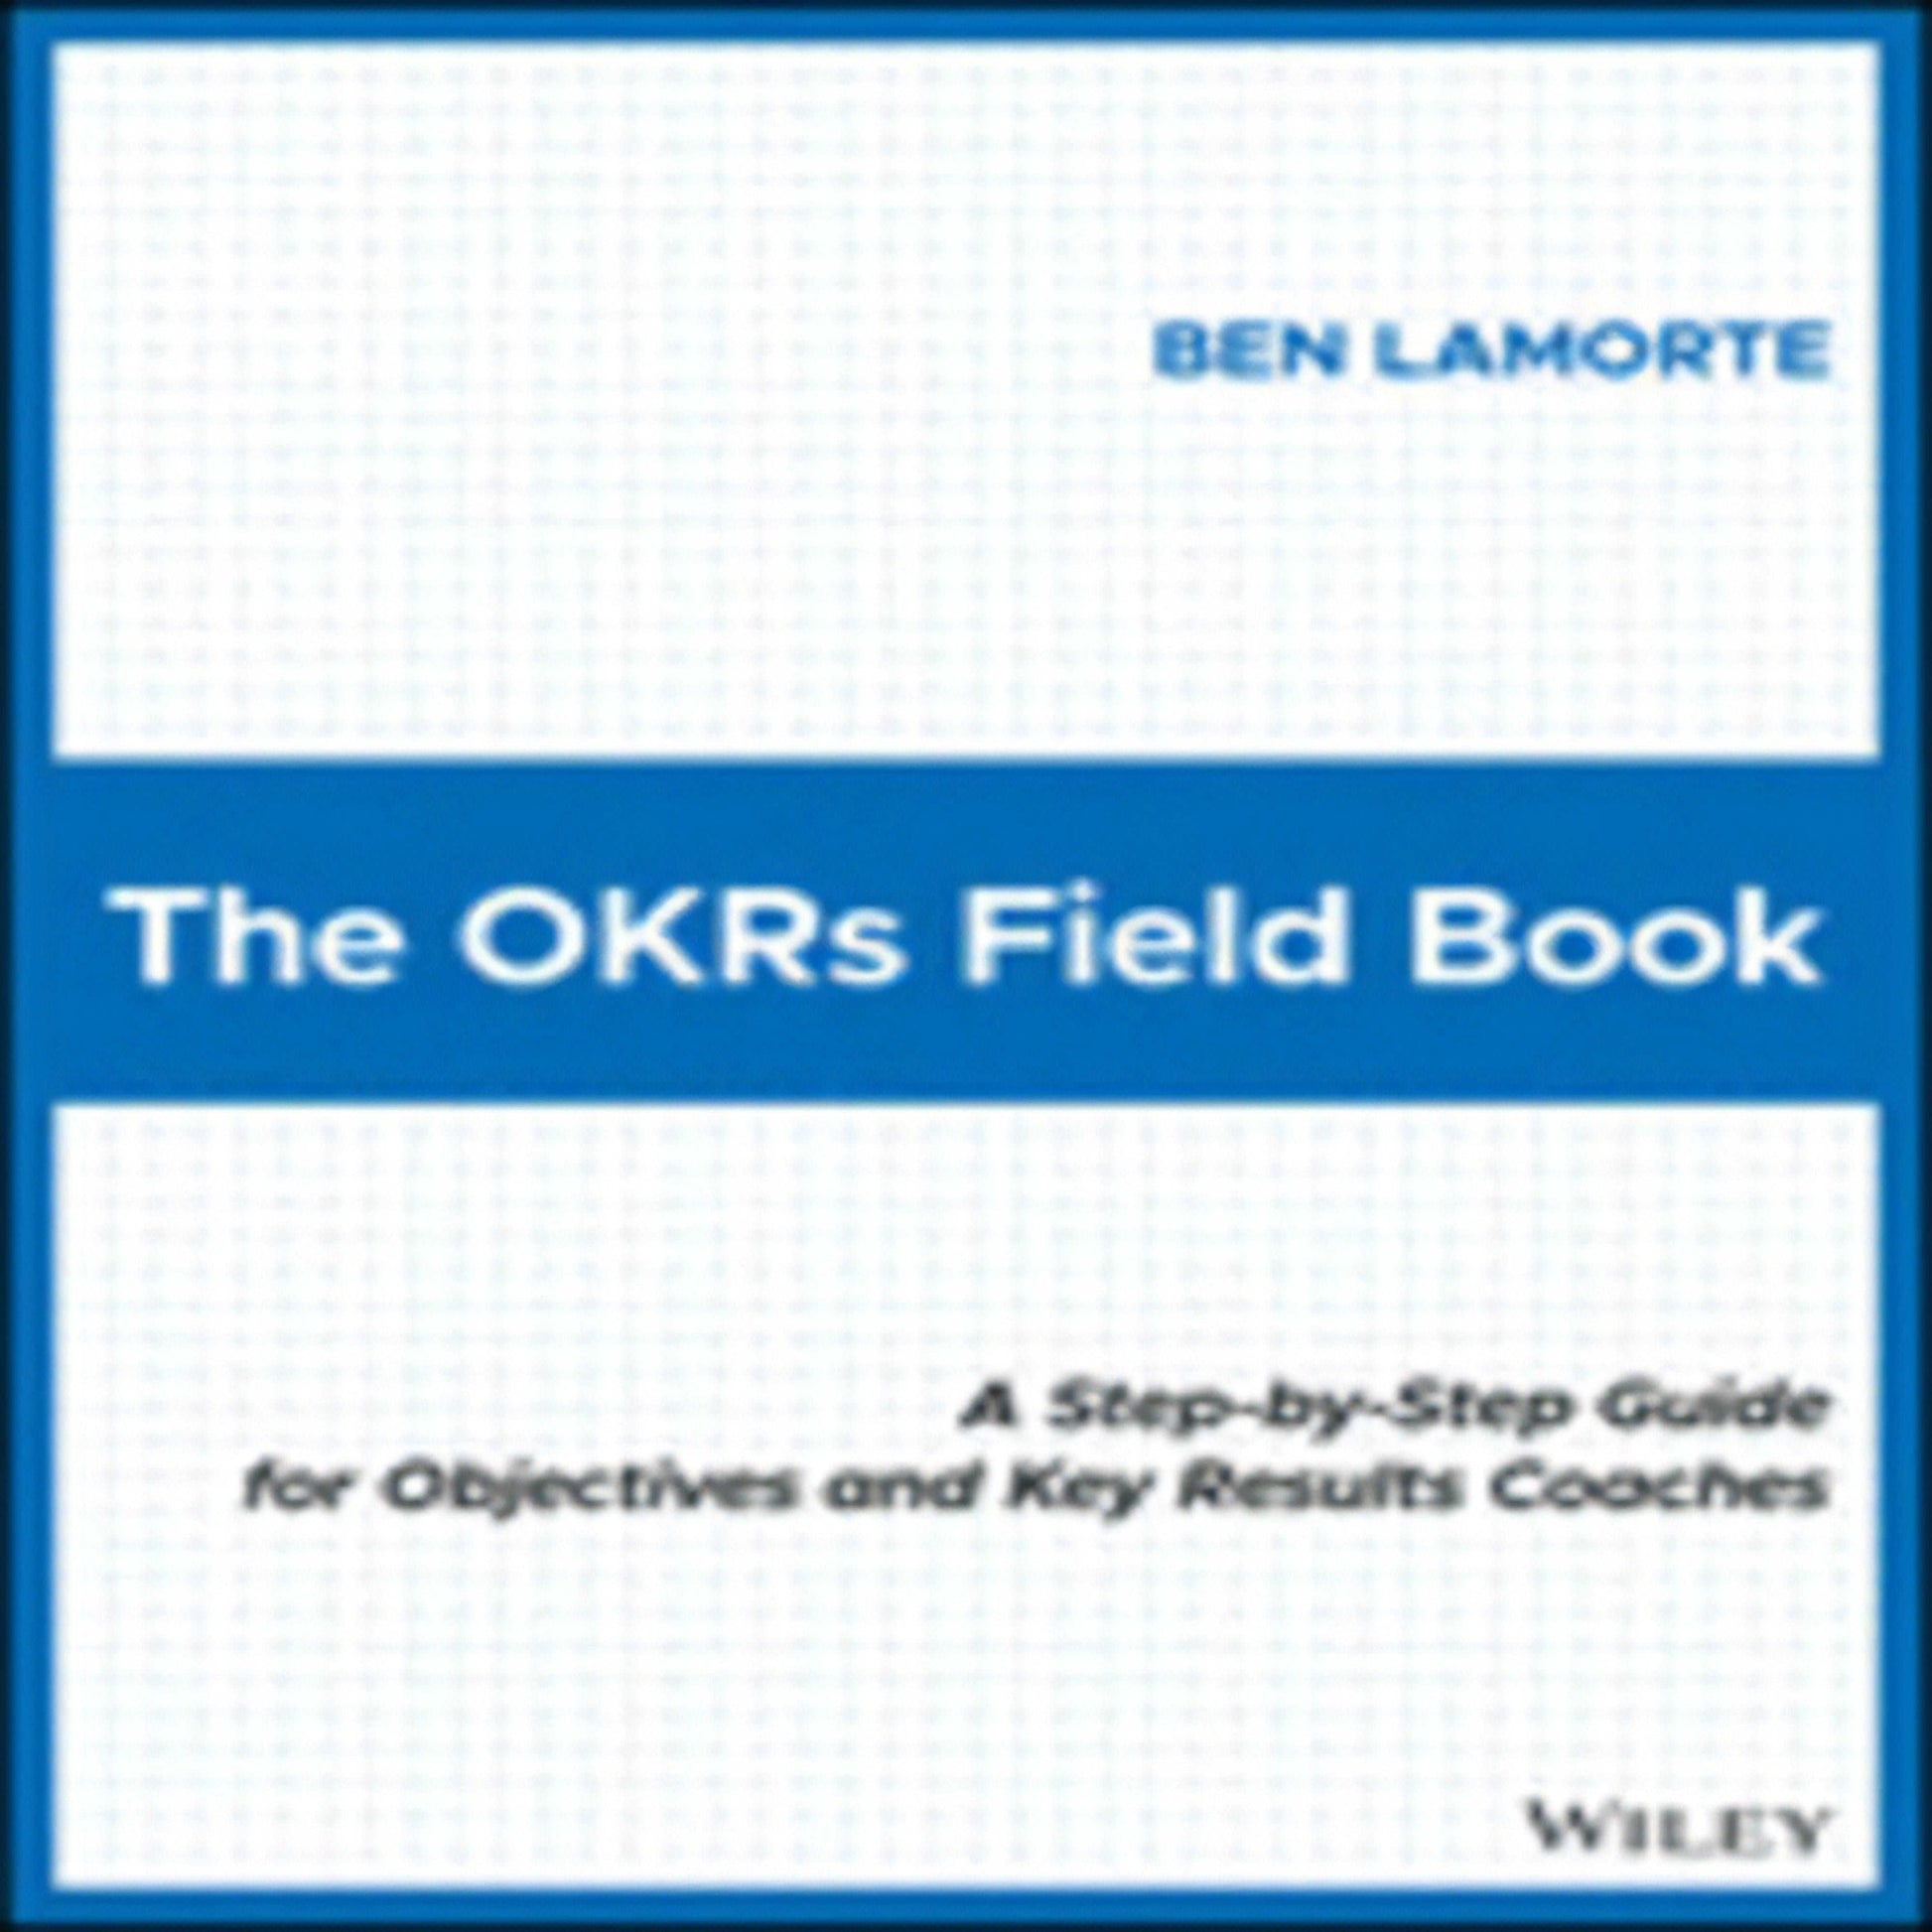 TEXTBOOK The Okrs Field Book: A Step-By-Step Guide for Objectives and DPGBOOKSTORE.COM. Today's Bestsellers.